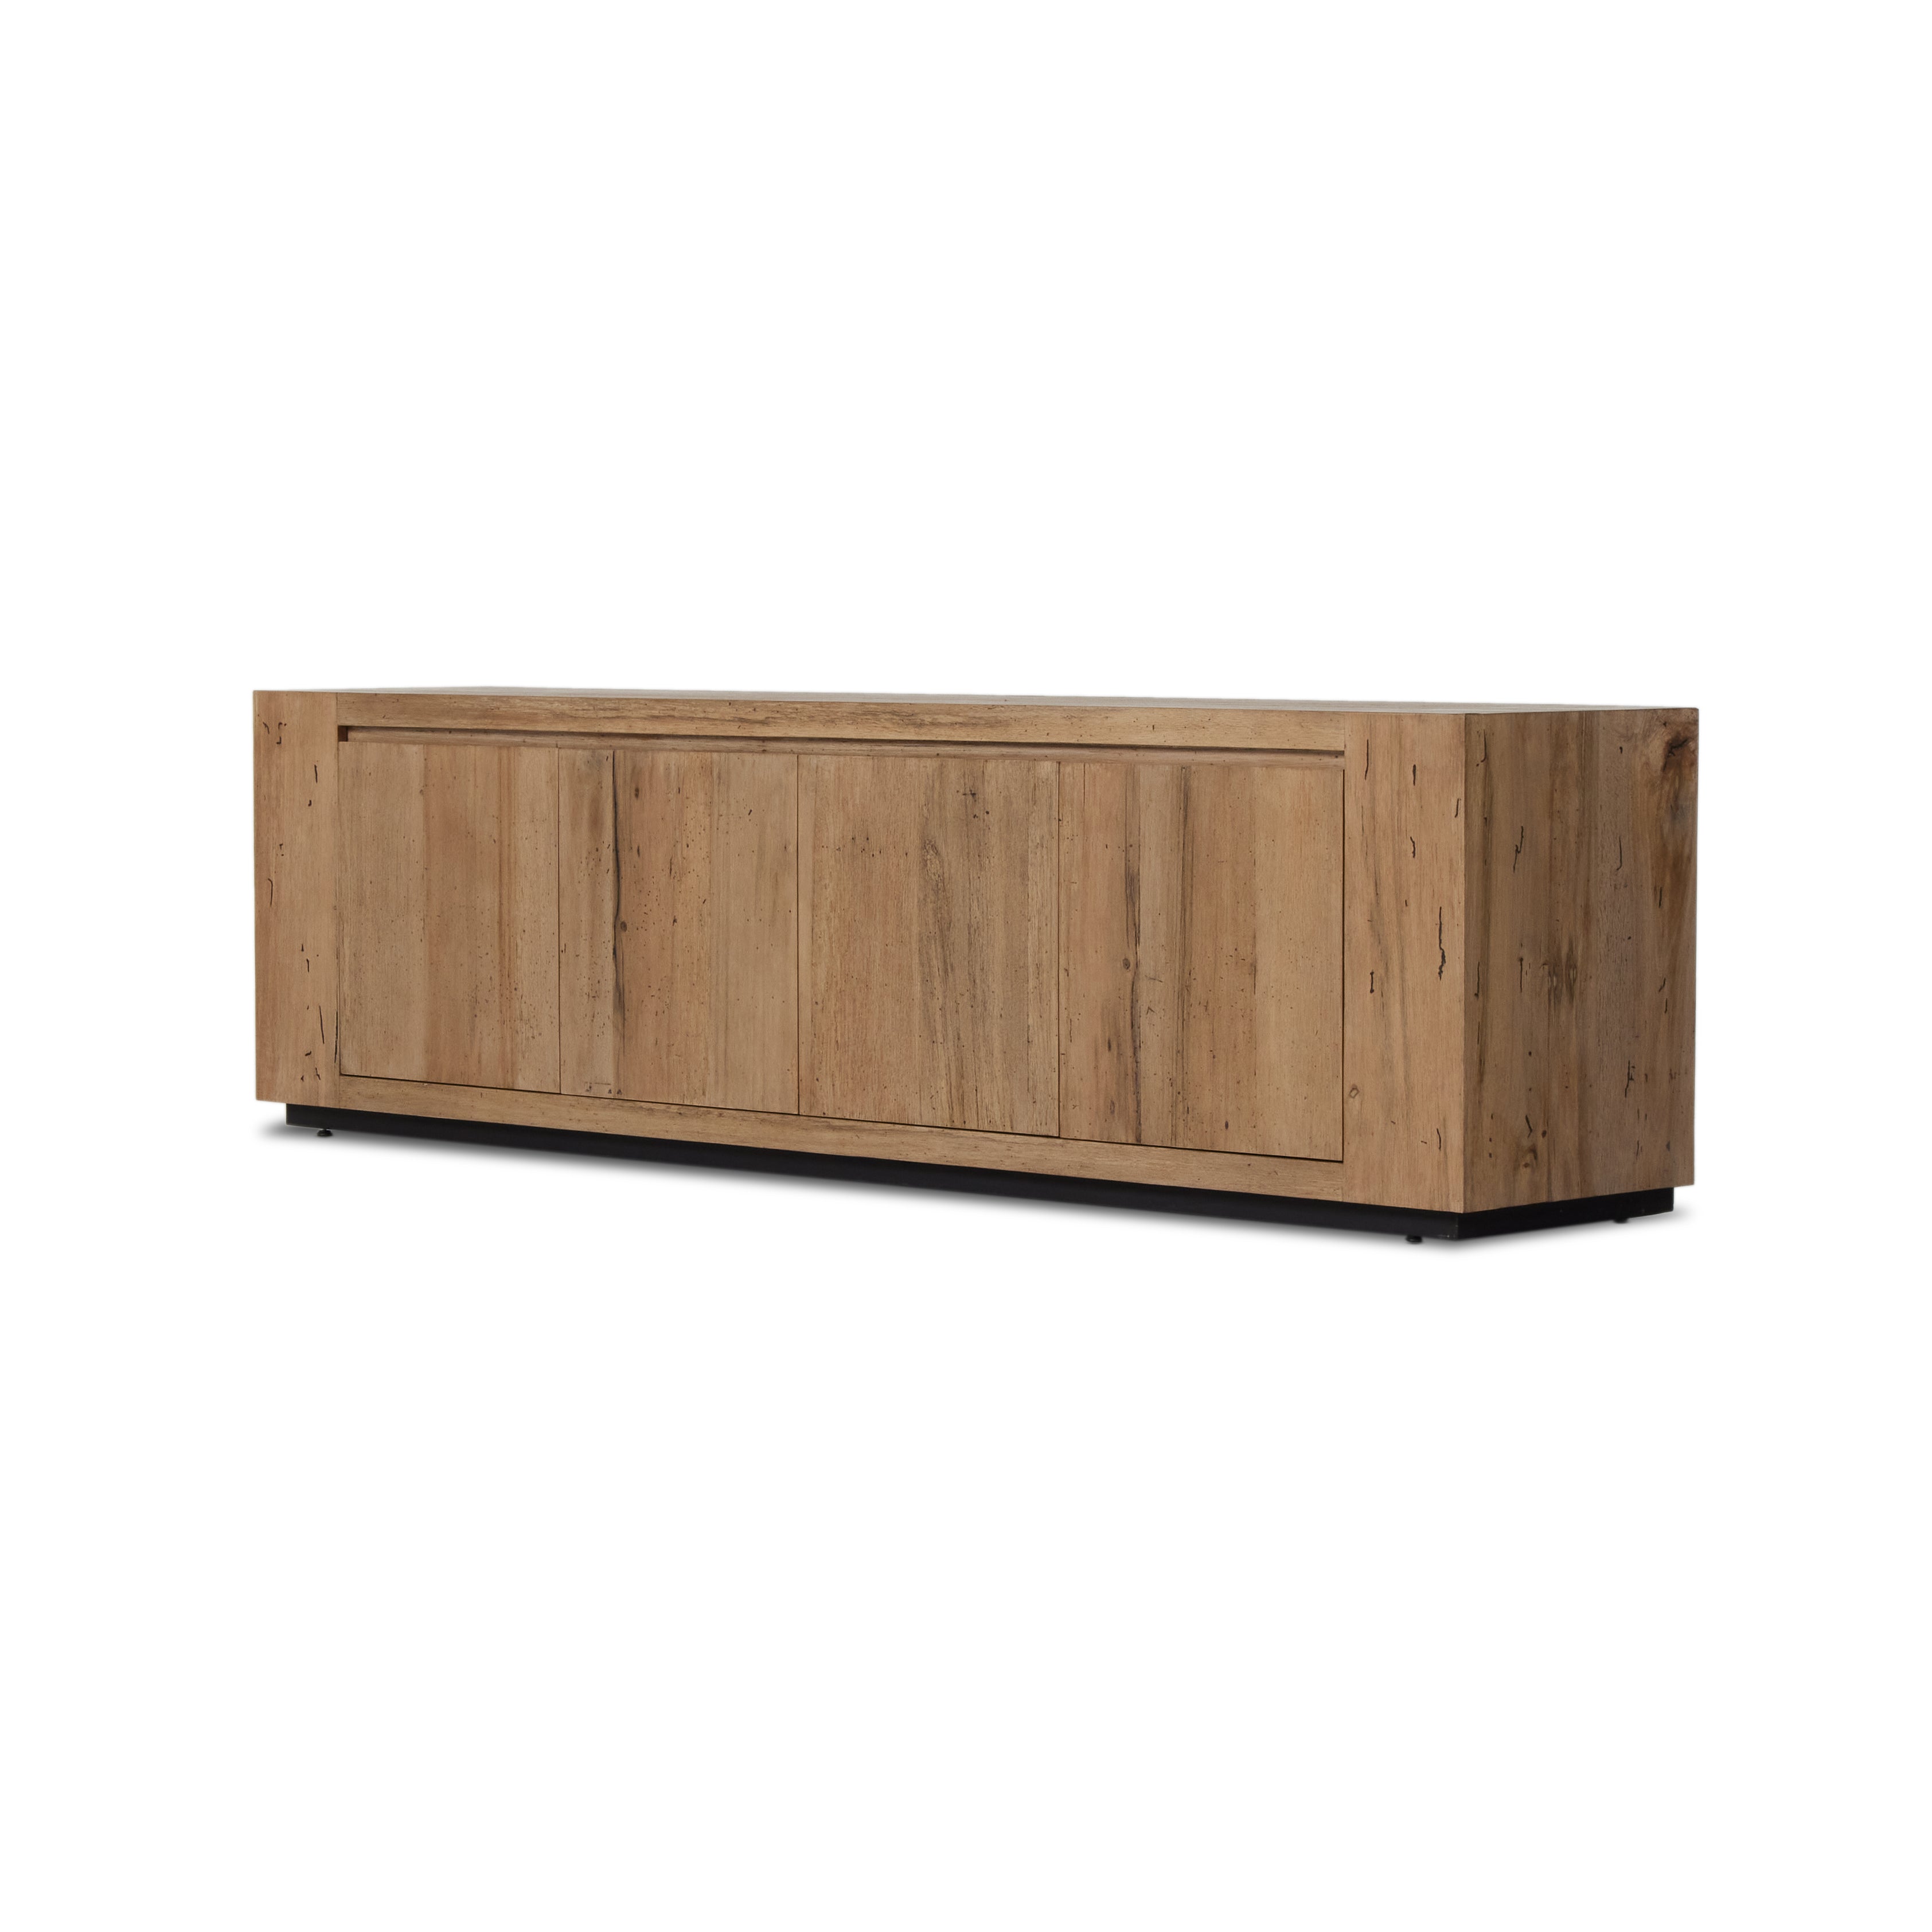 Made from thick-cut oak veneer with a faux rustic finish made to emulate wormwood, this spacious media console features chunky squared legs and dovetail joinery detailing. Amethyst Home provides interior design, new home construction design consulting, vintage area rugs, and lighting in the Park City metro area.